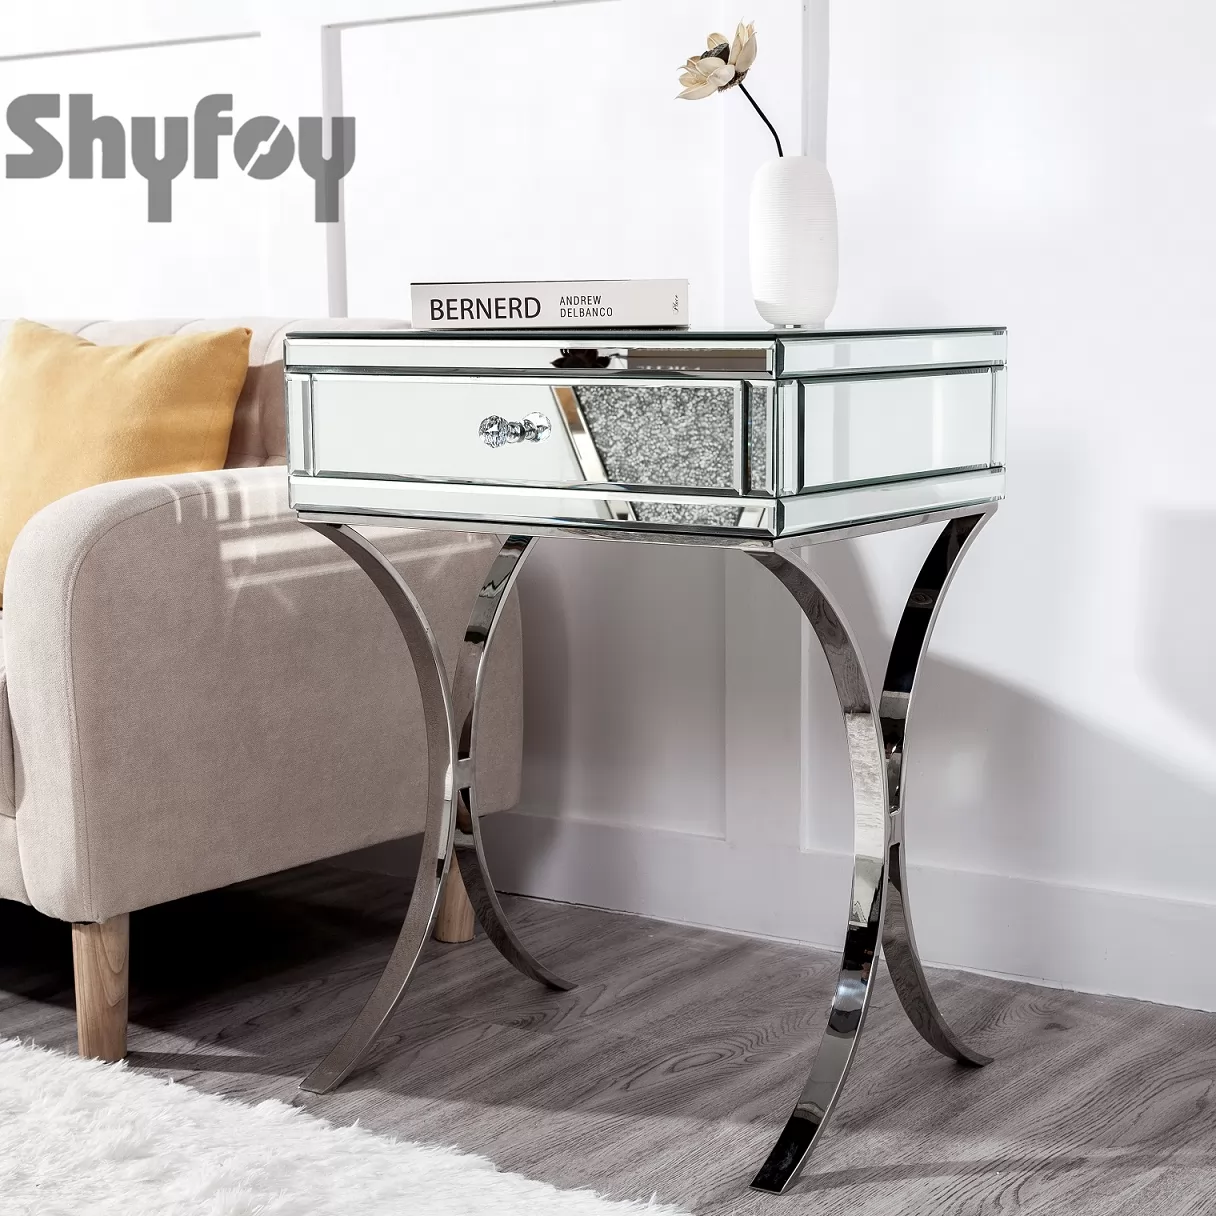 Mirrored Bedside Table with Stainless Steel | Silver Single Drawer Mirrored Night Table | Glass Mirror Nightstand / SF-BT010